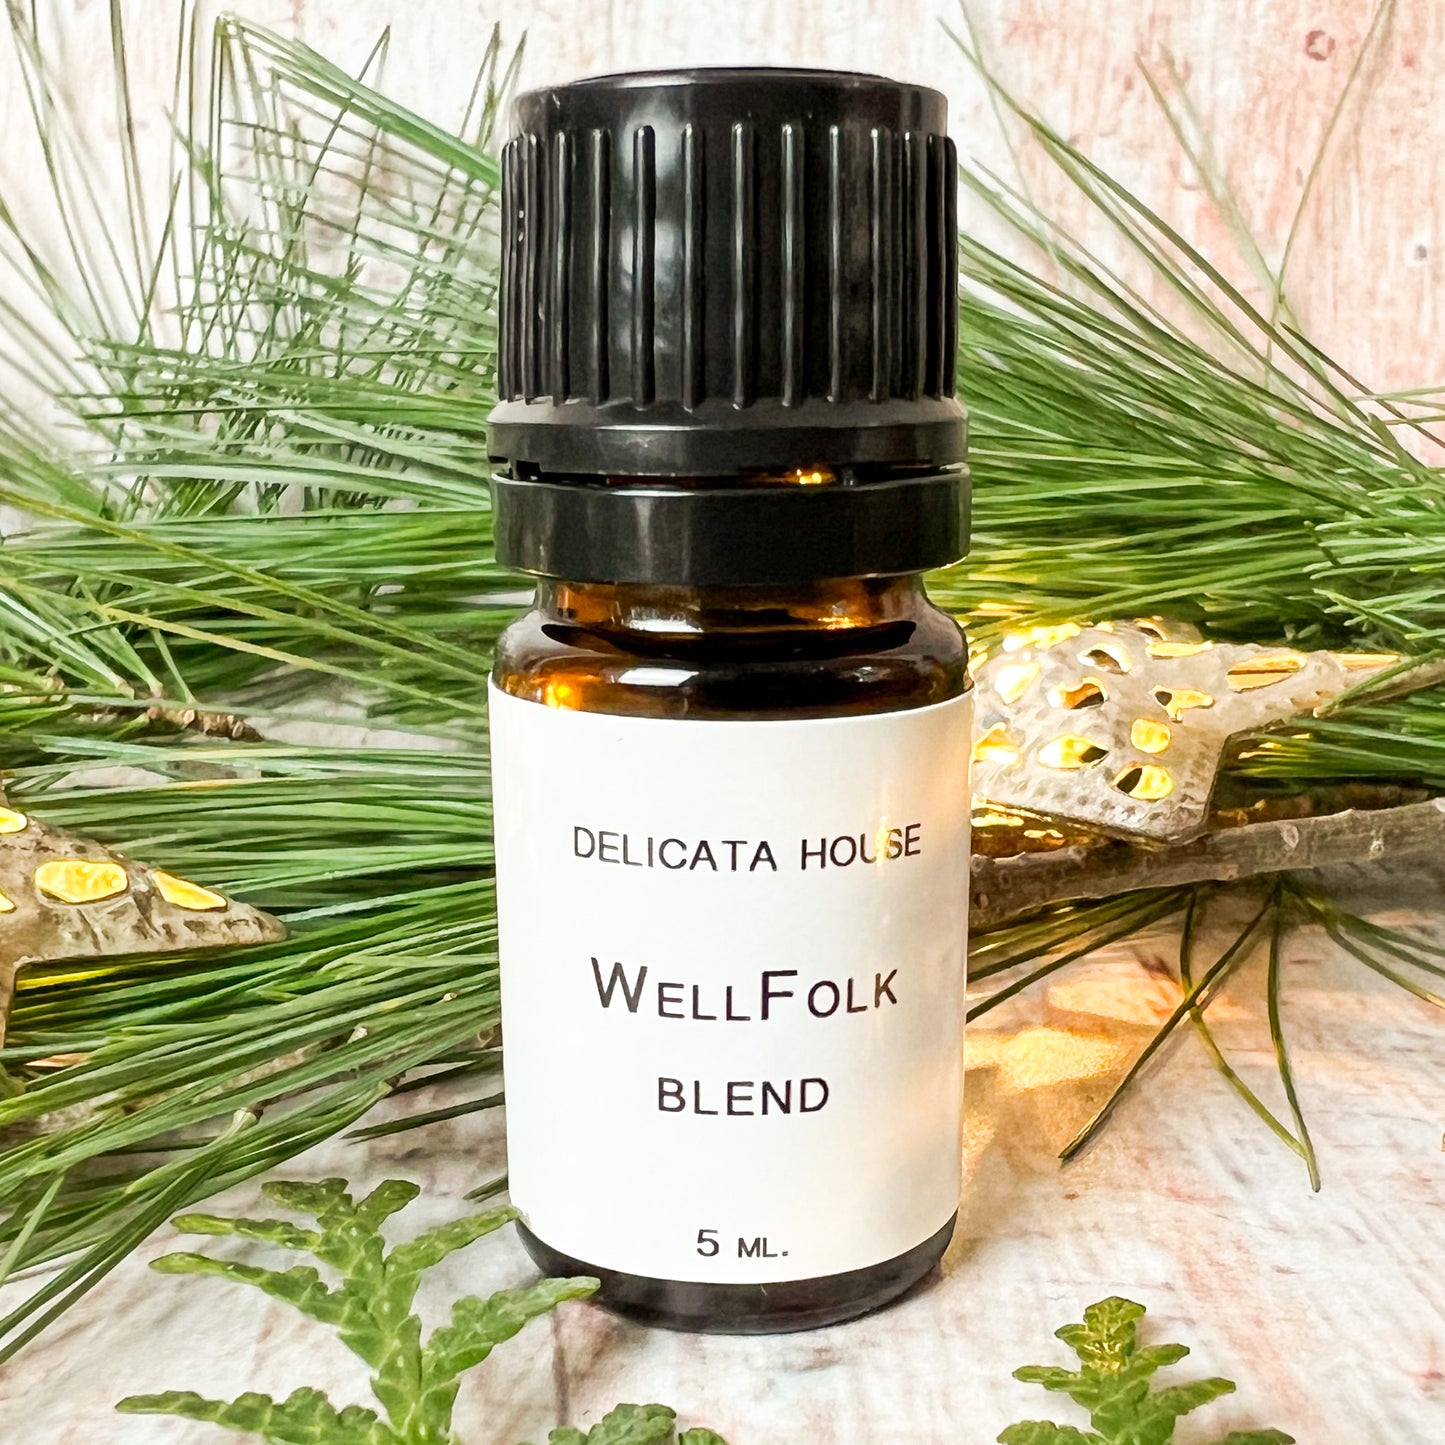 Aromatherapy Blend - WellFolk Essential Oil Blend - WellFolk Immune Boost Aromatherapy Blend - Folk Remedy Diffuser Blend - Essential Oils for Wellness and Cleaning